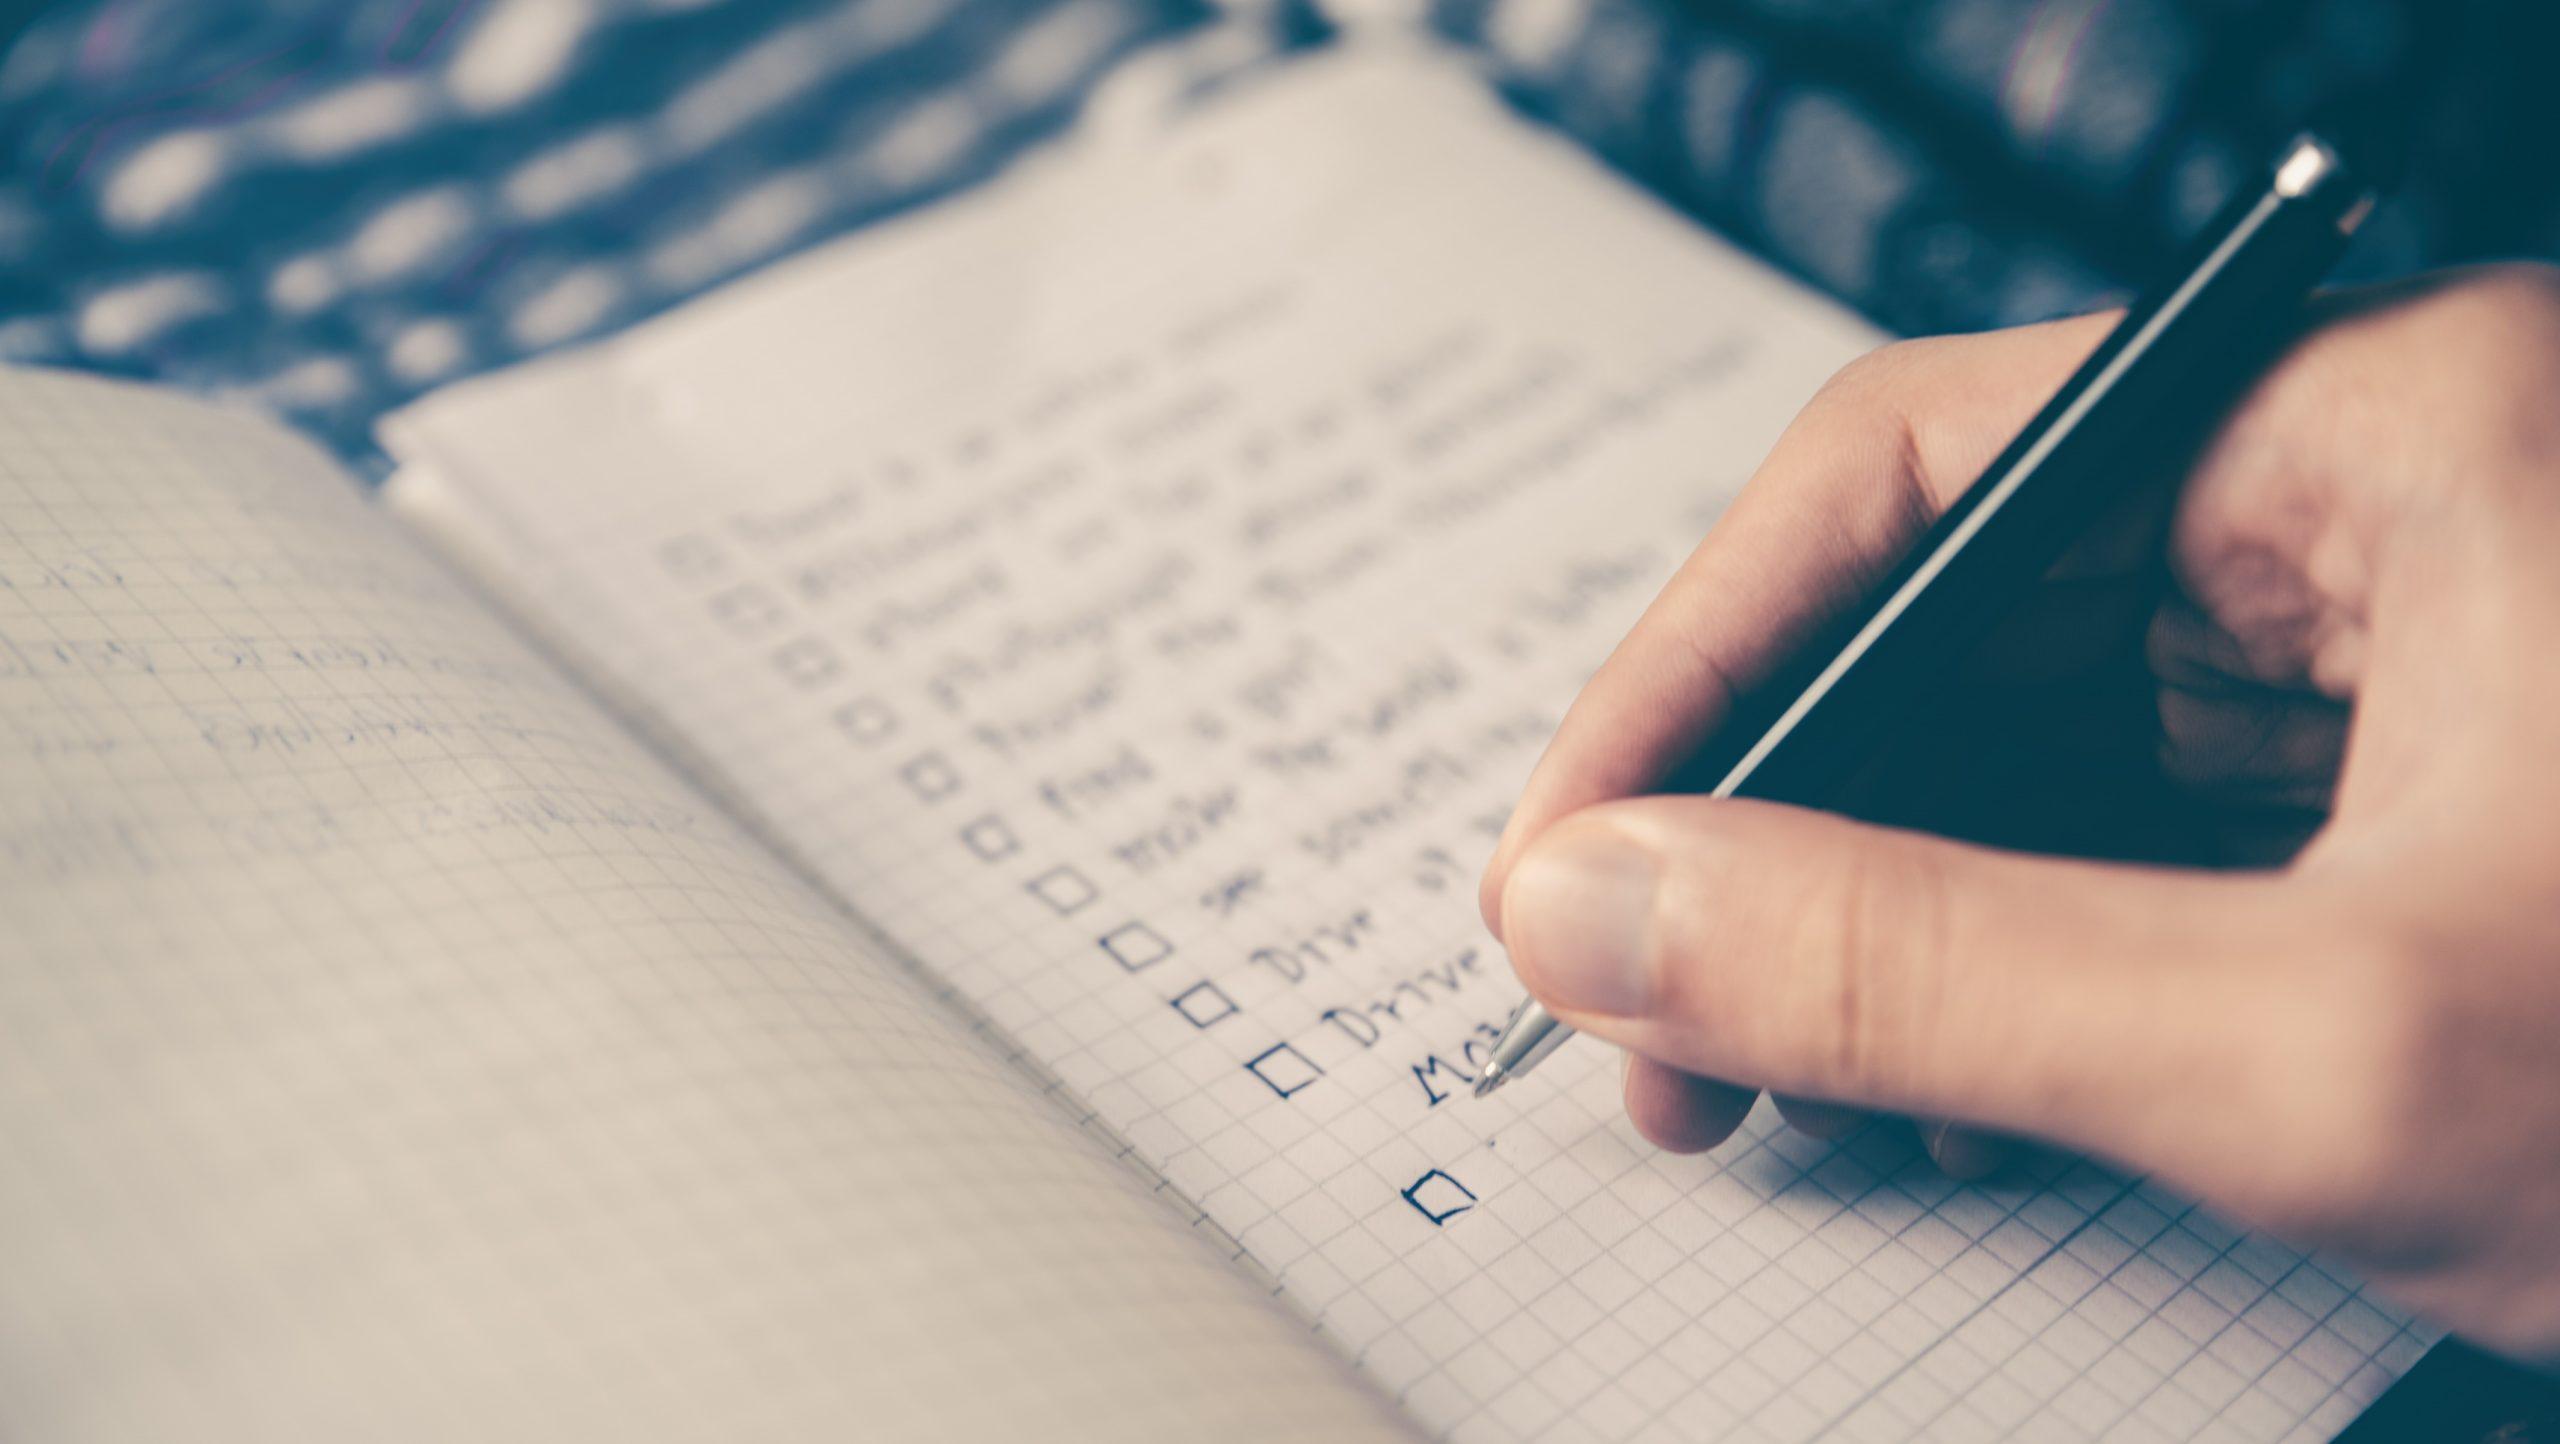 Person writing in a notepad as part of an article about a marketing checklist.